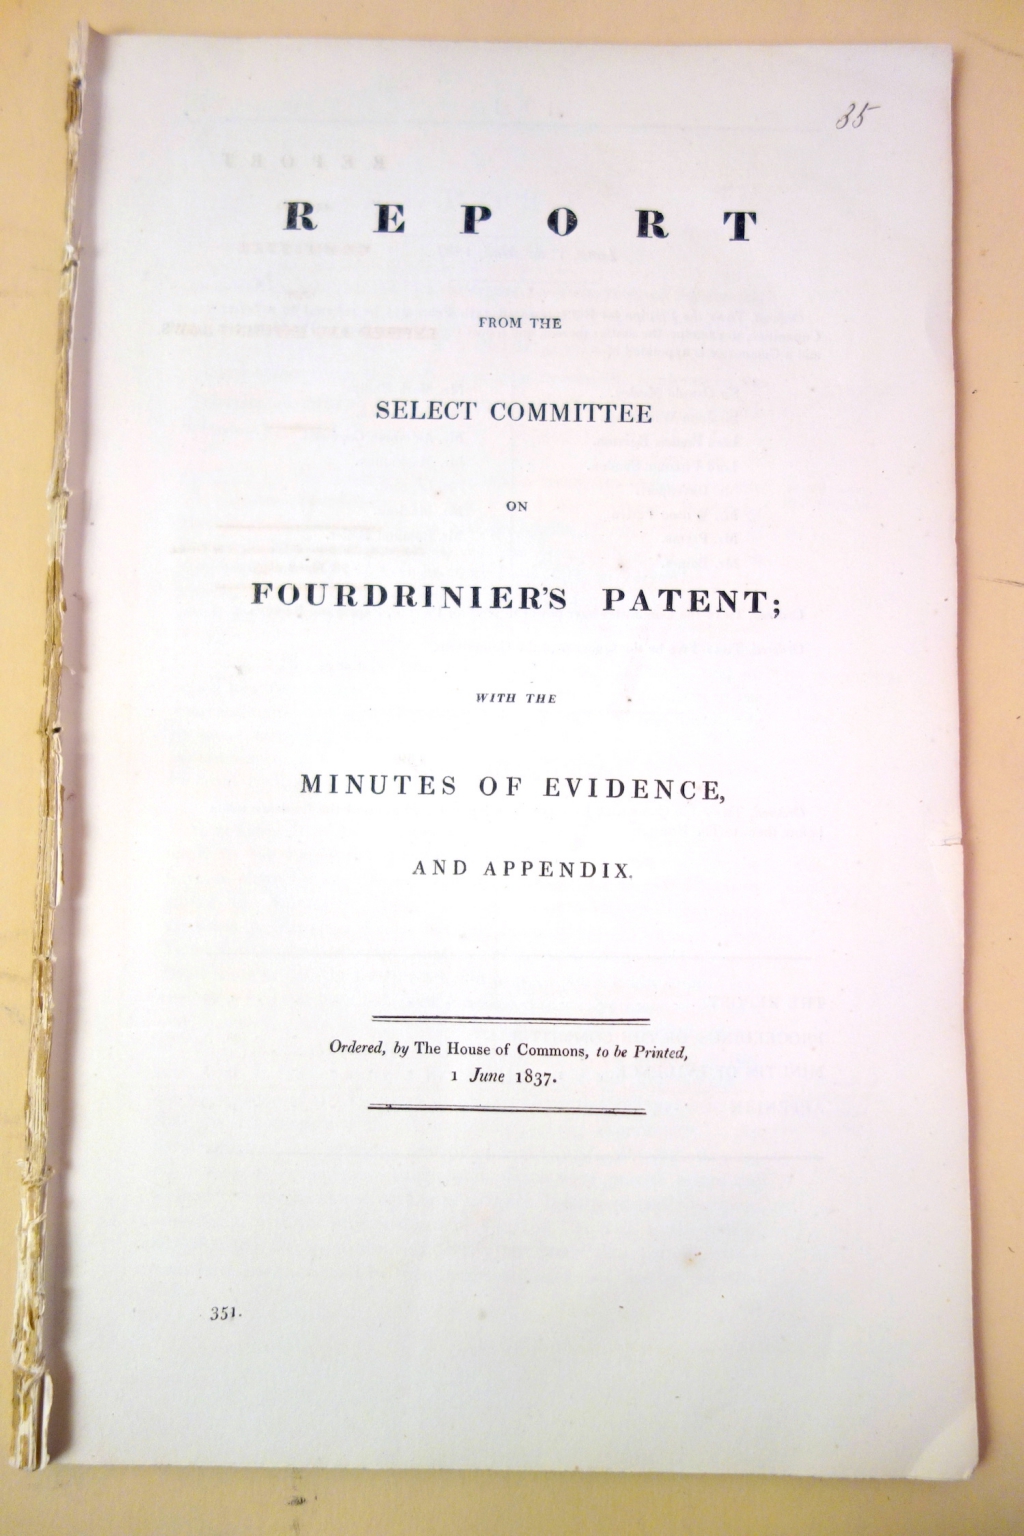 Title of the Report from the Selecto Committee on Fourdrinier's Patent